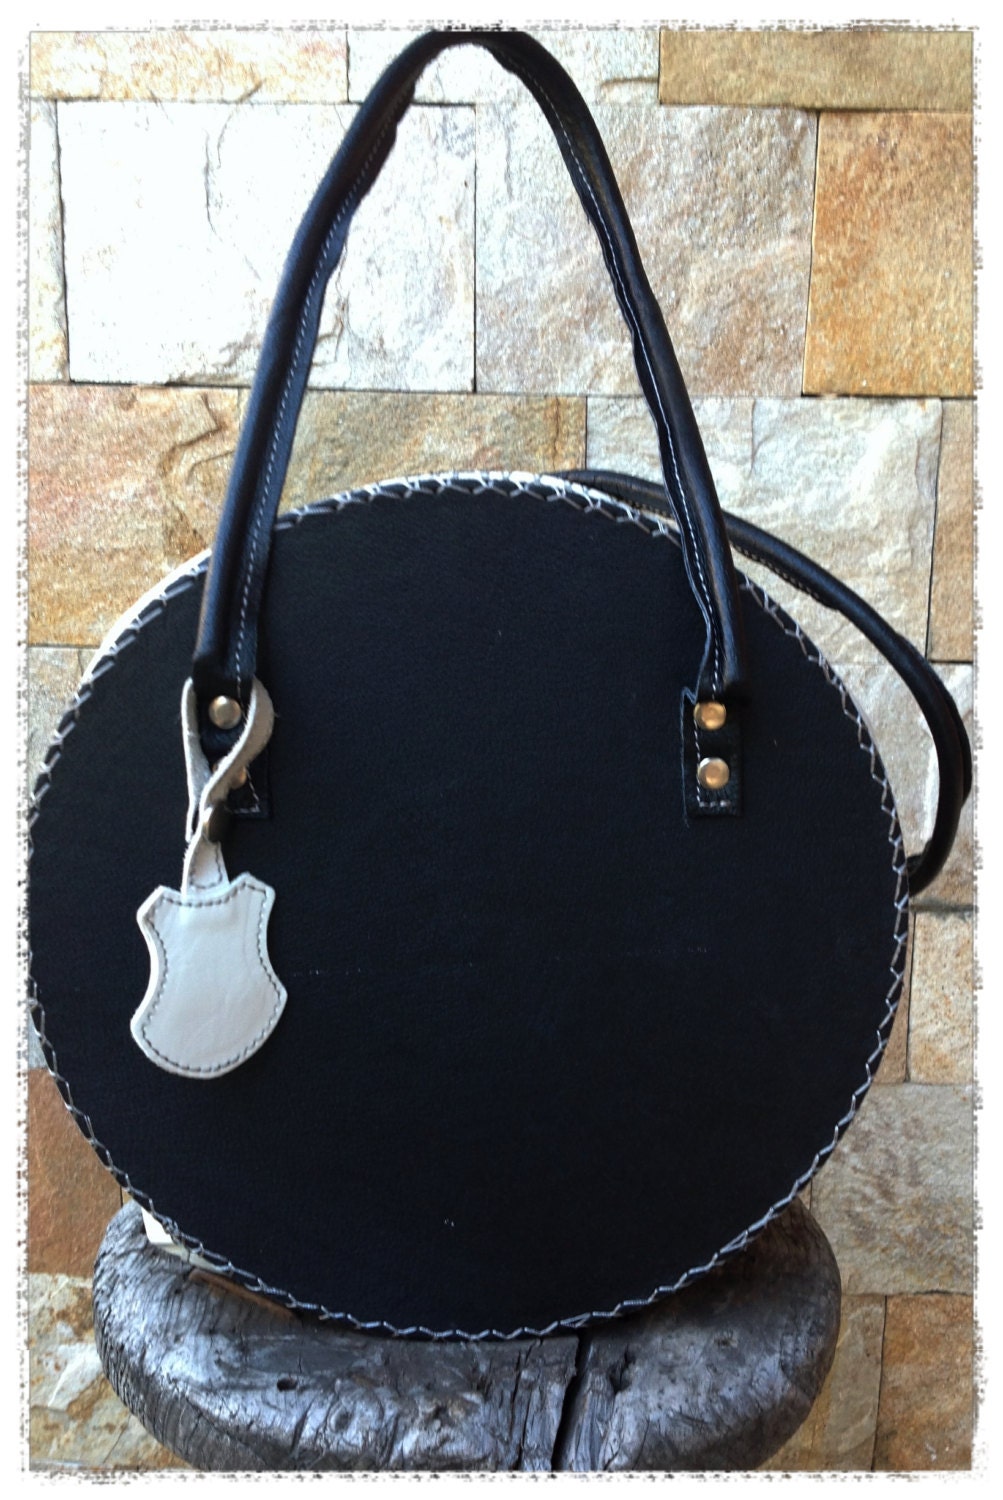 Black and white leather bag round leather by KorektLeatherGoods